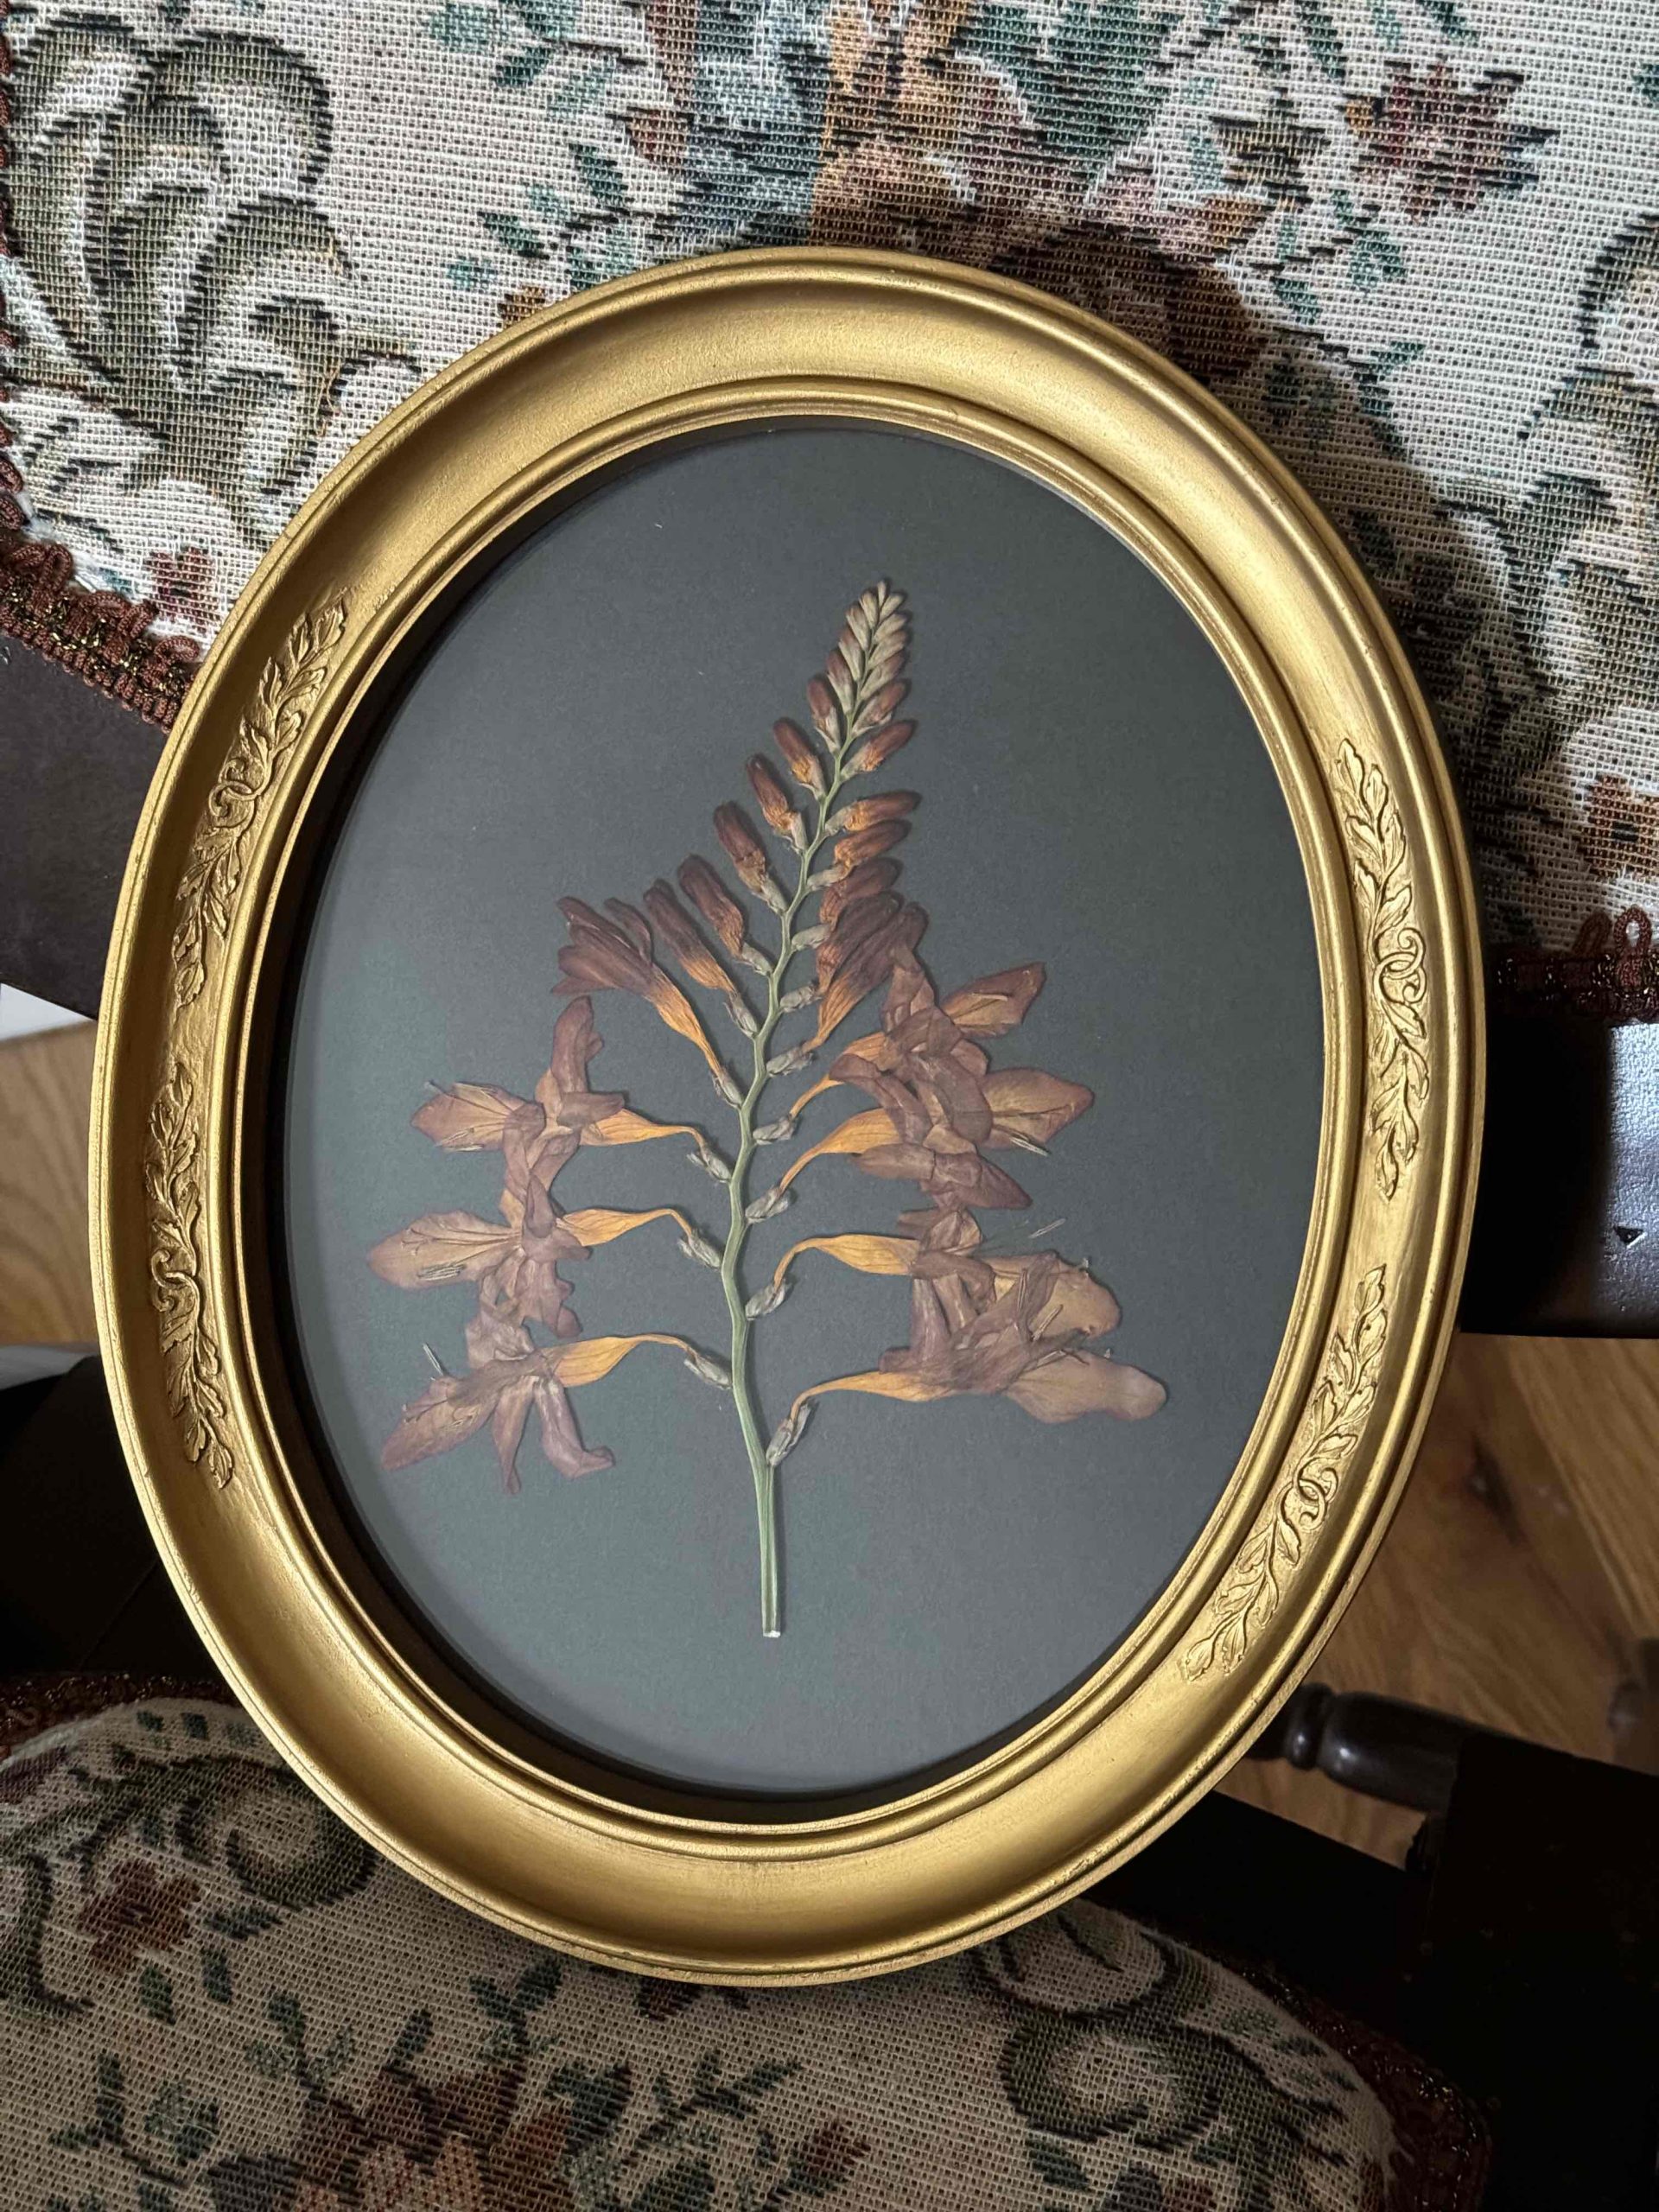 A pressed Crocosmia flower is mounted to black paper in an oval vintage frame.